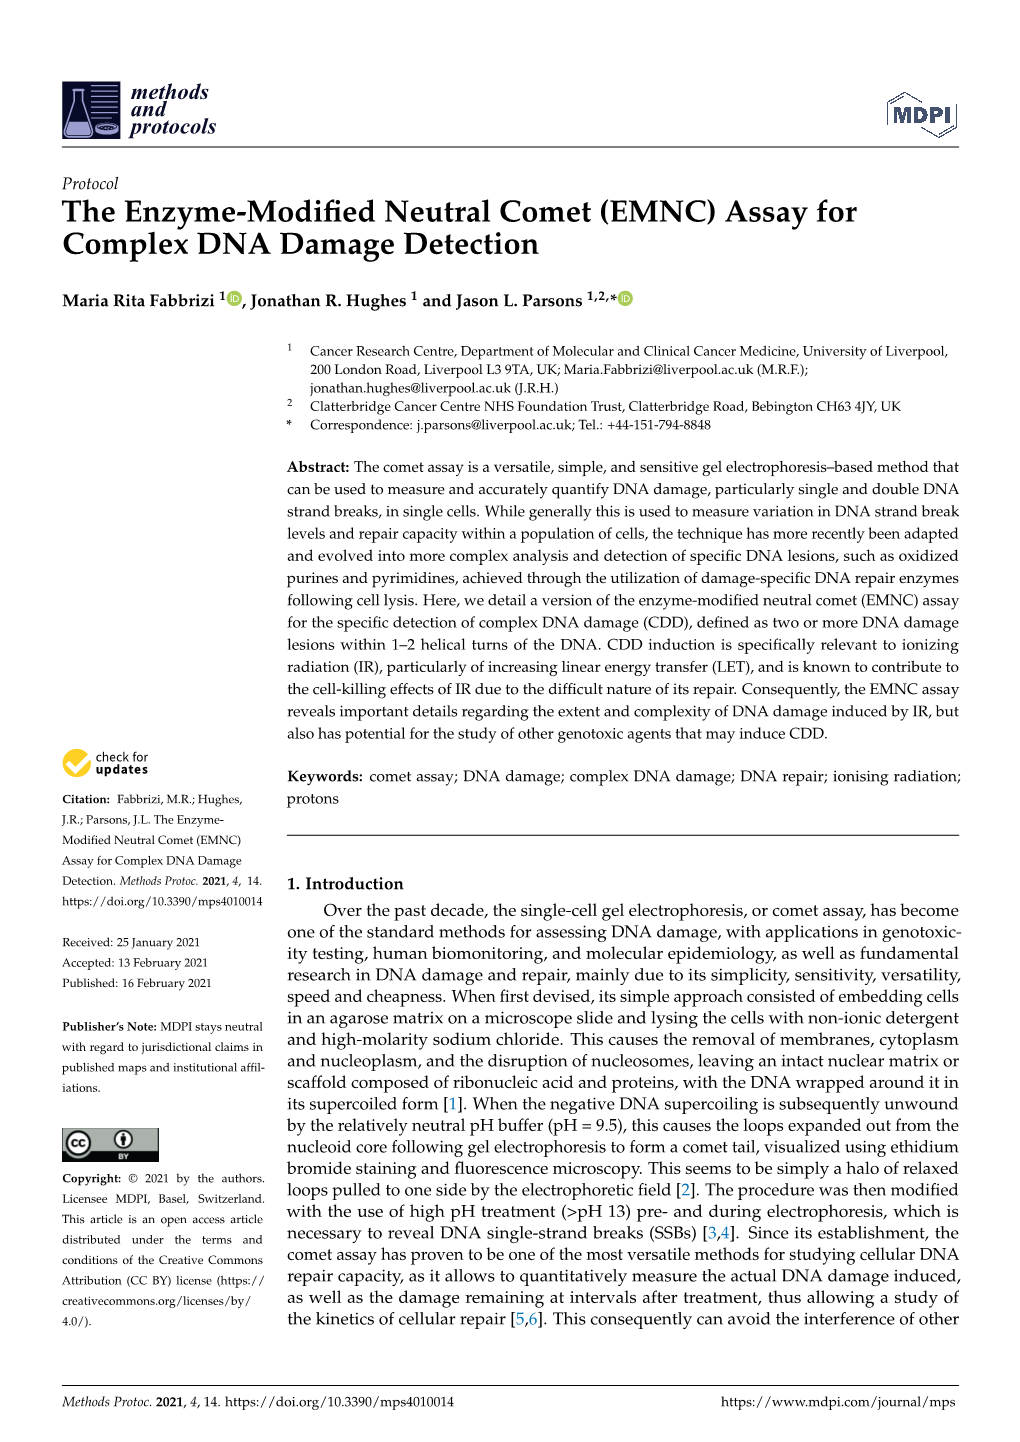 The Enzyme-Modified Neutral Comet (EMNC) Assay for Complex DNA